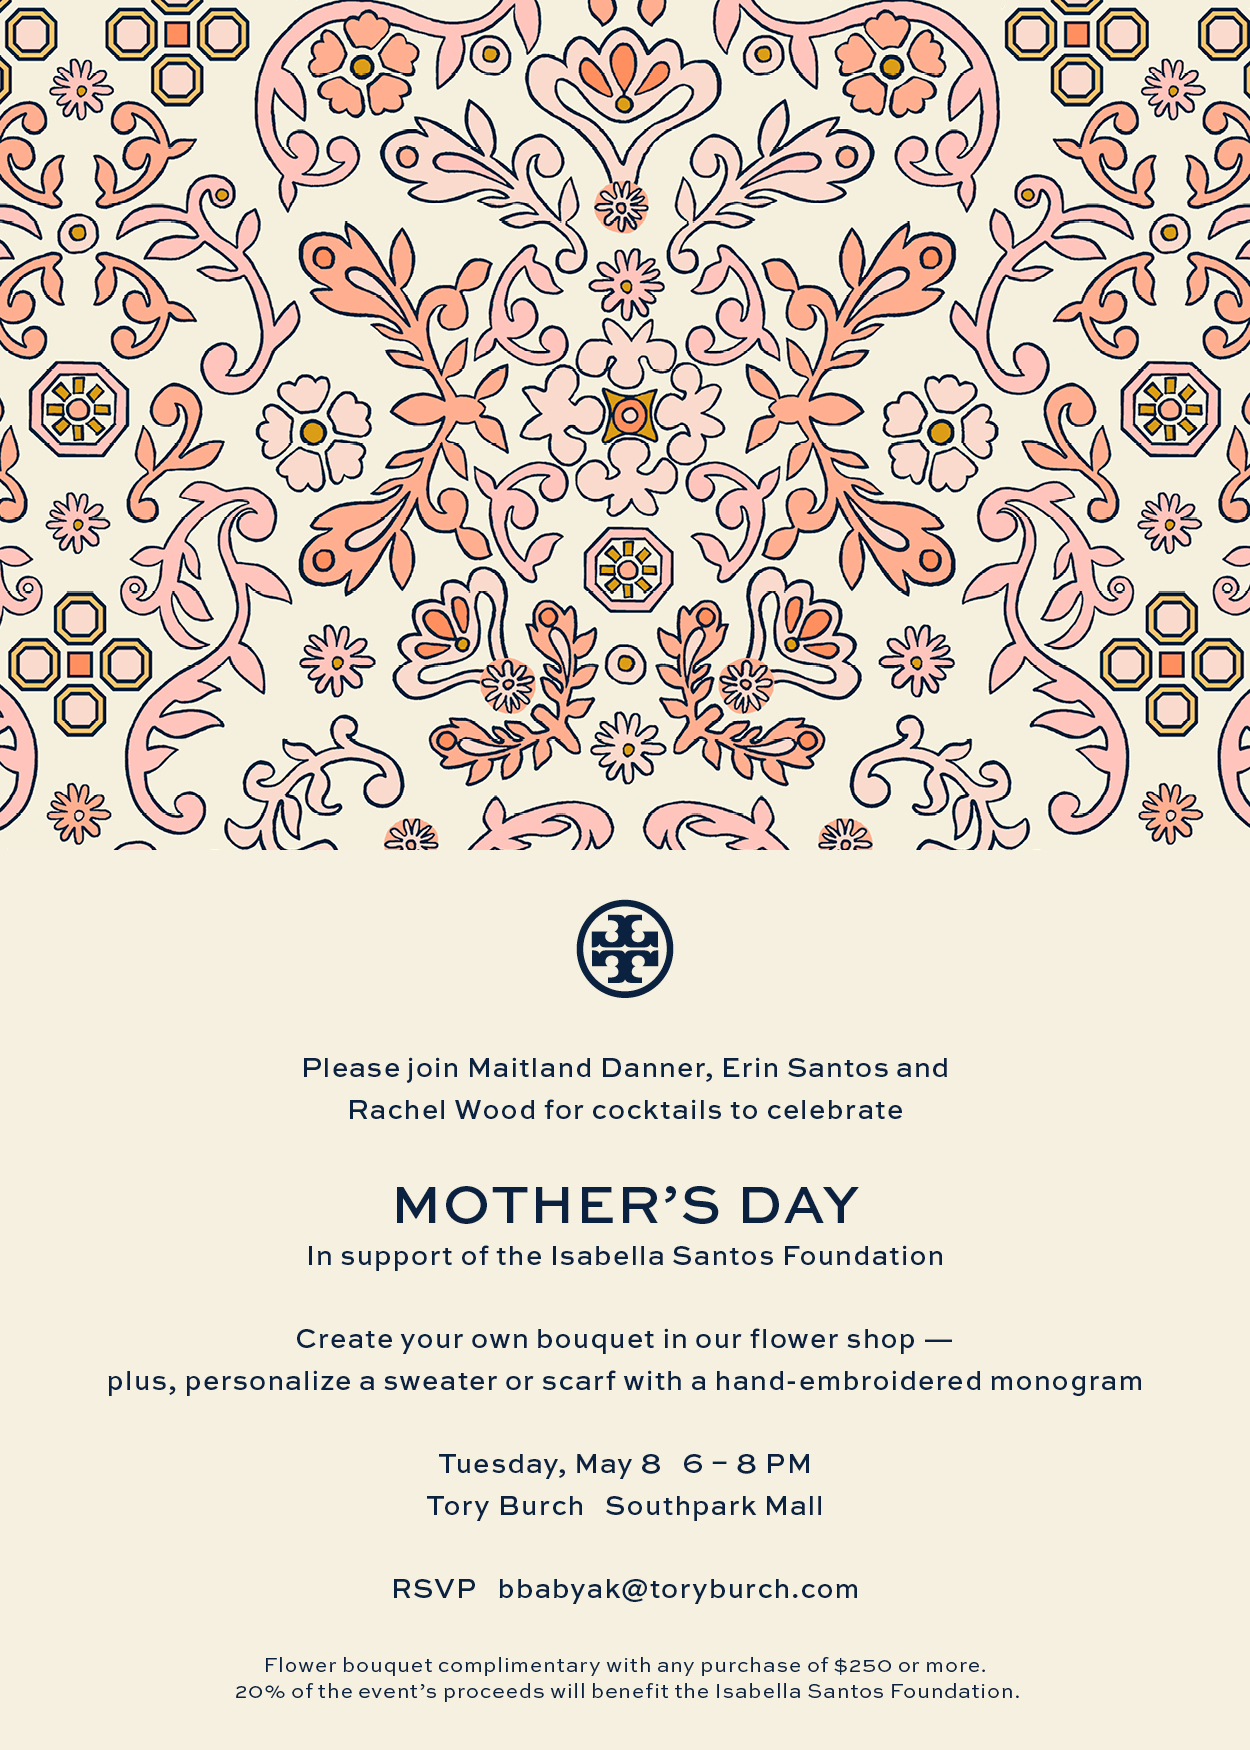 Tory Burch Mother's Day Event: May 8 6PM - Isabella Santos Foundation